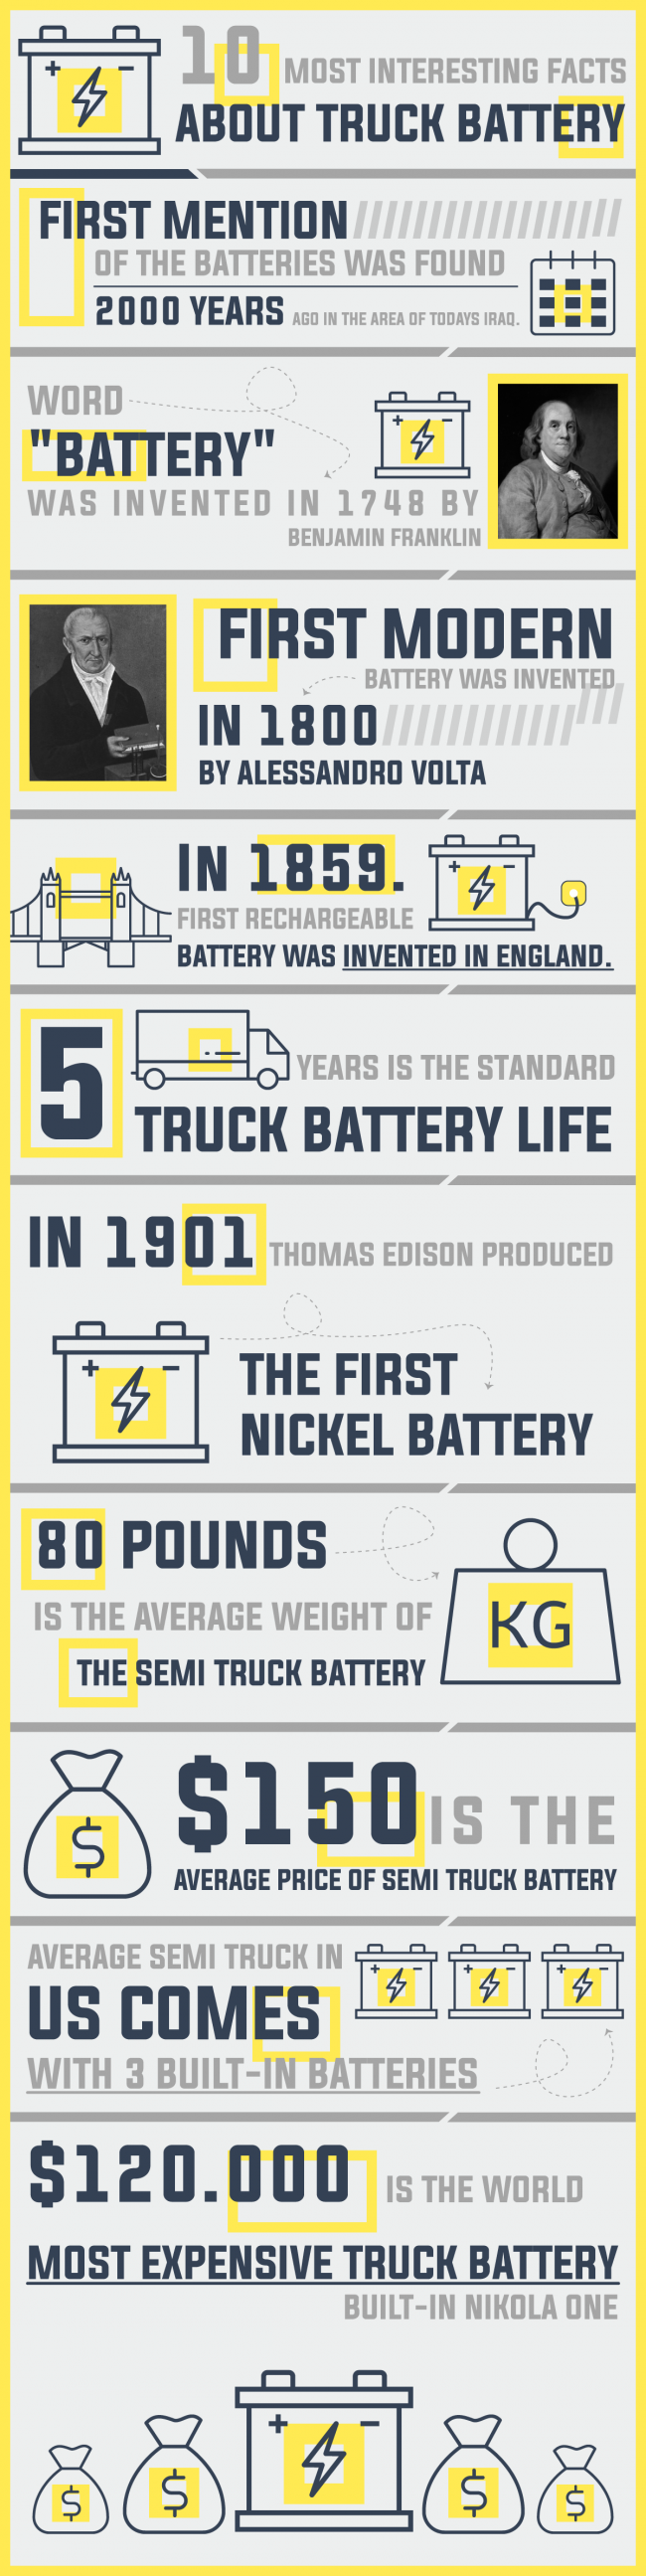 infographic-10-most-interesting-facts-about-truck-battery